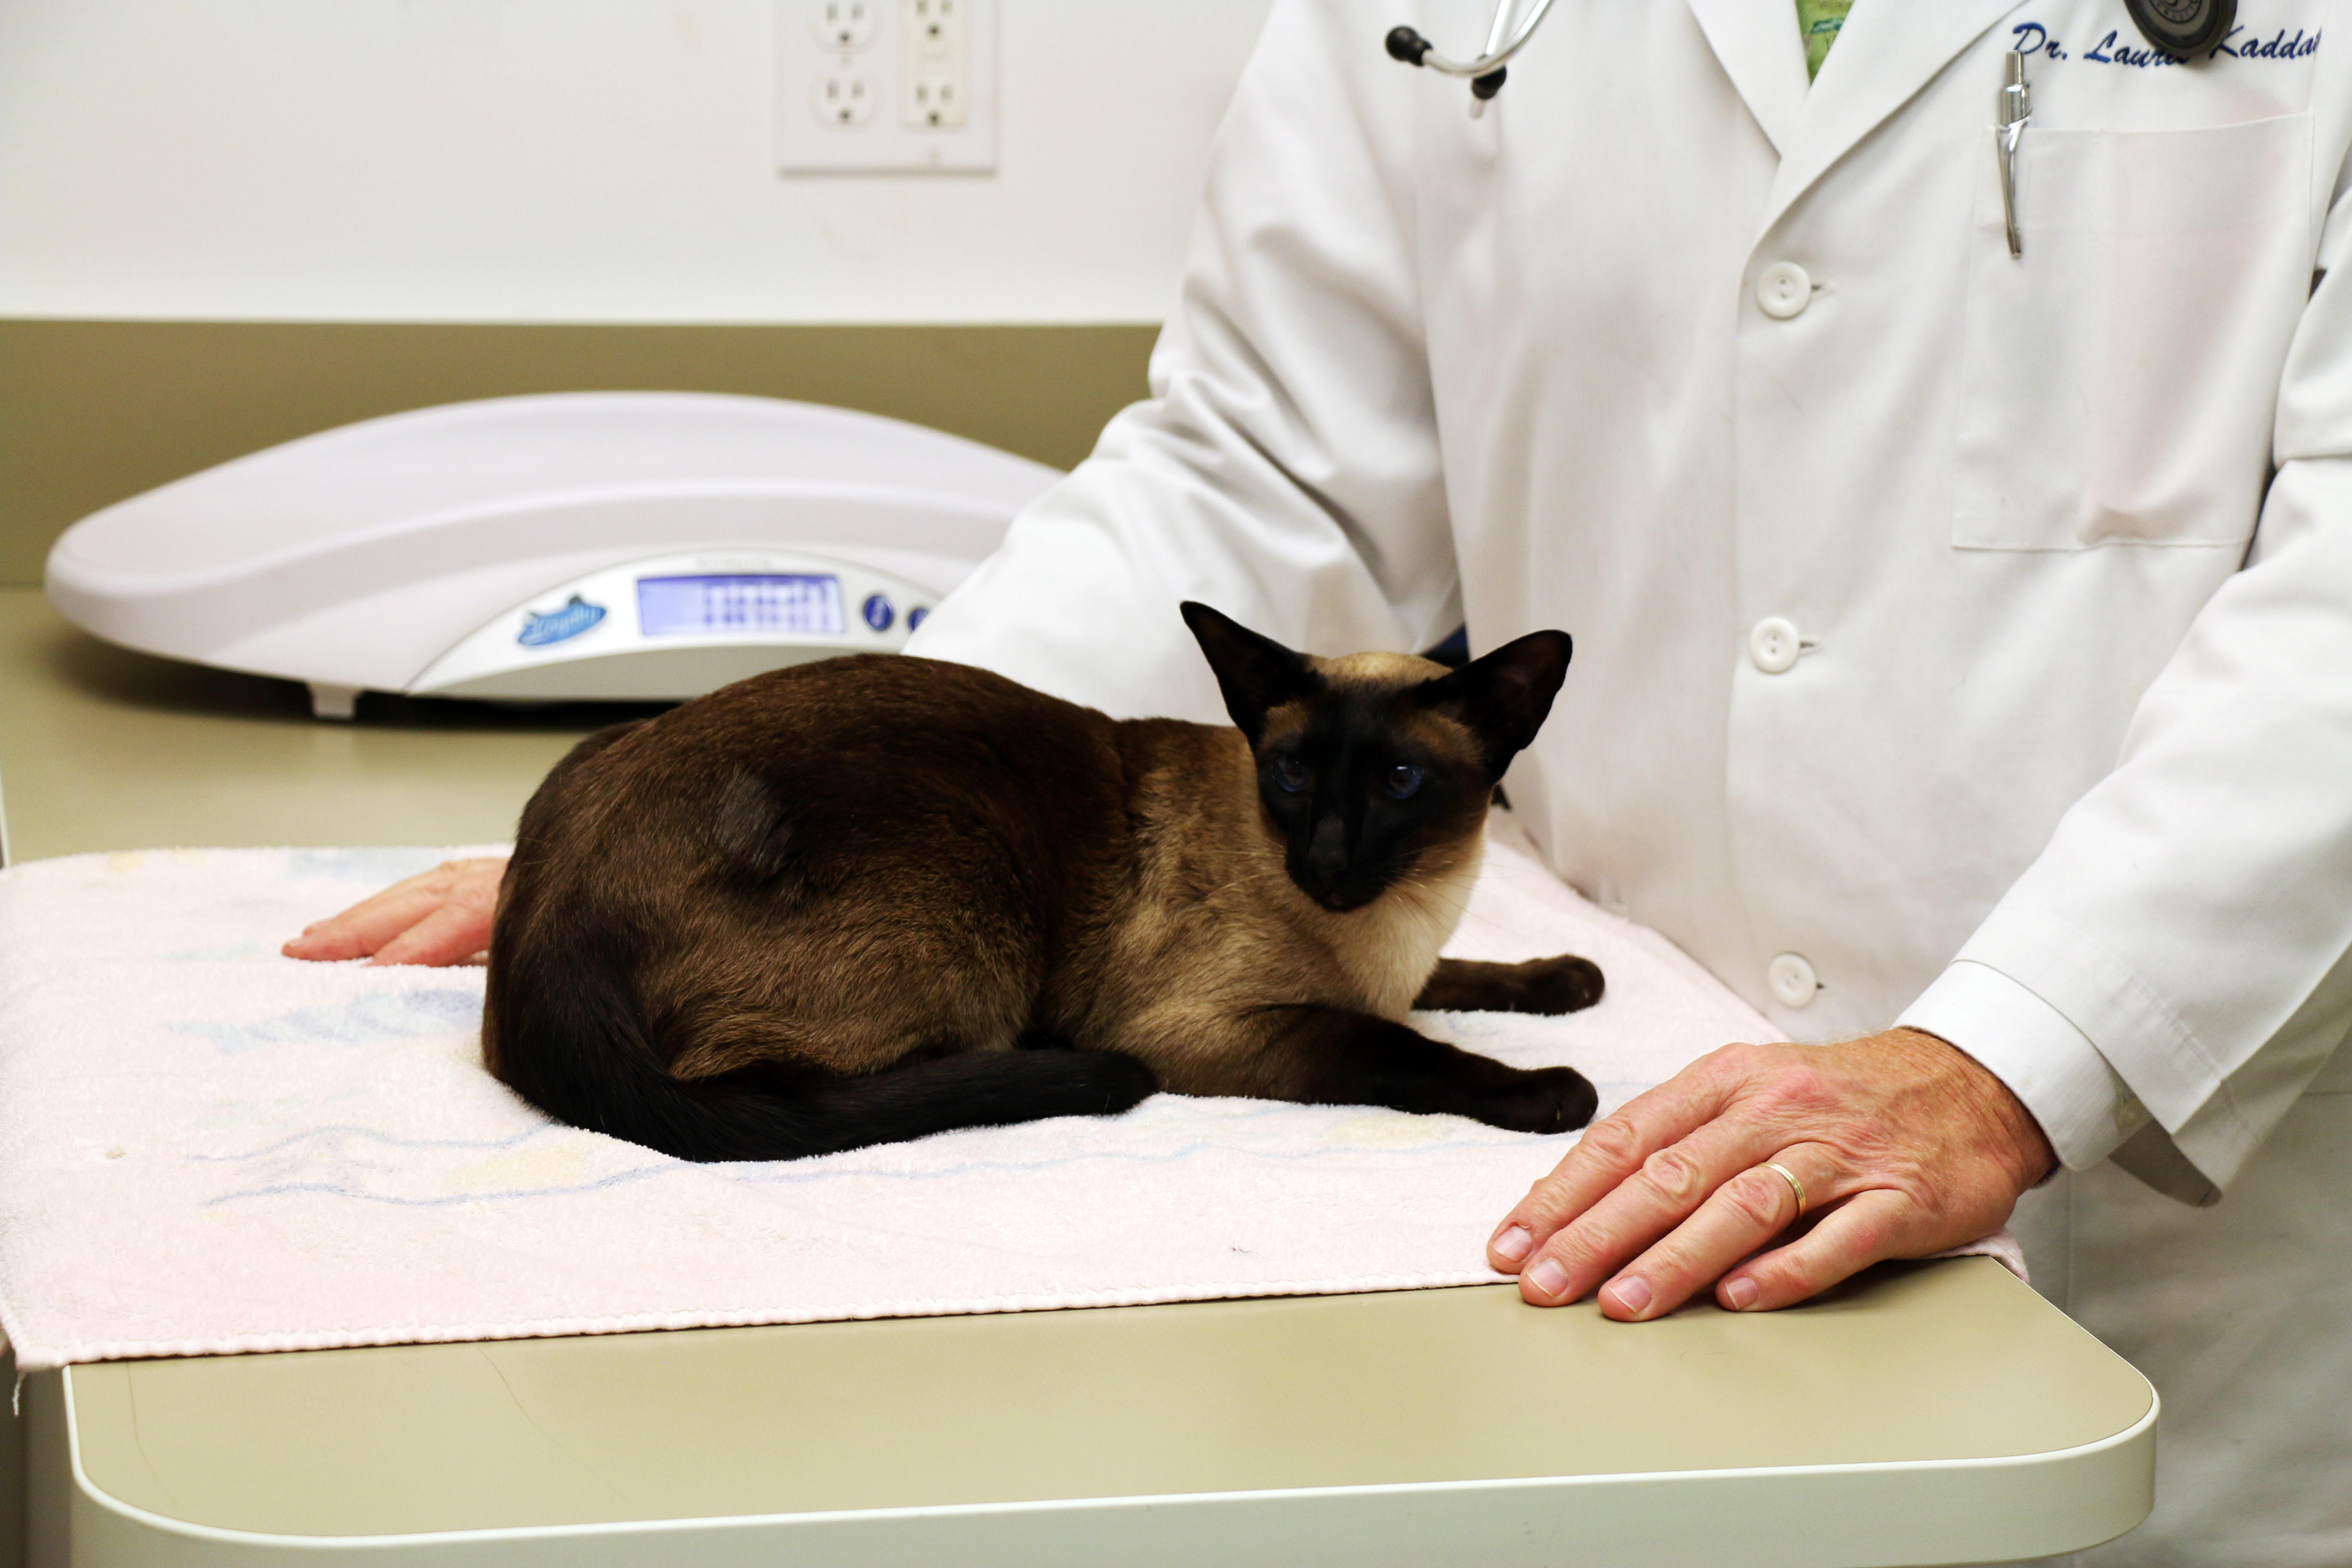 Our clinical team takes extra steps to keep feline patients comfortable and stress-free while at Pound Ridge Veterinary Center.